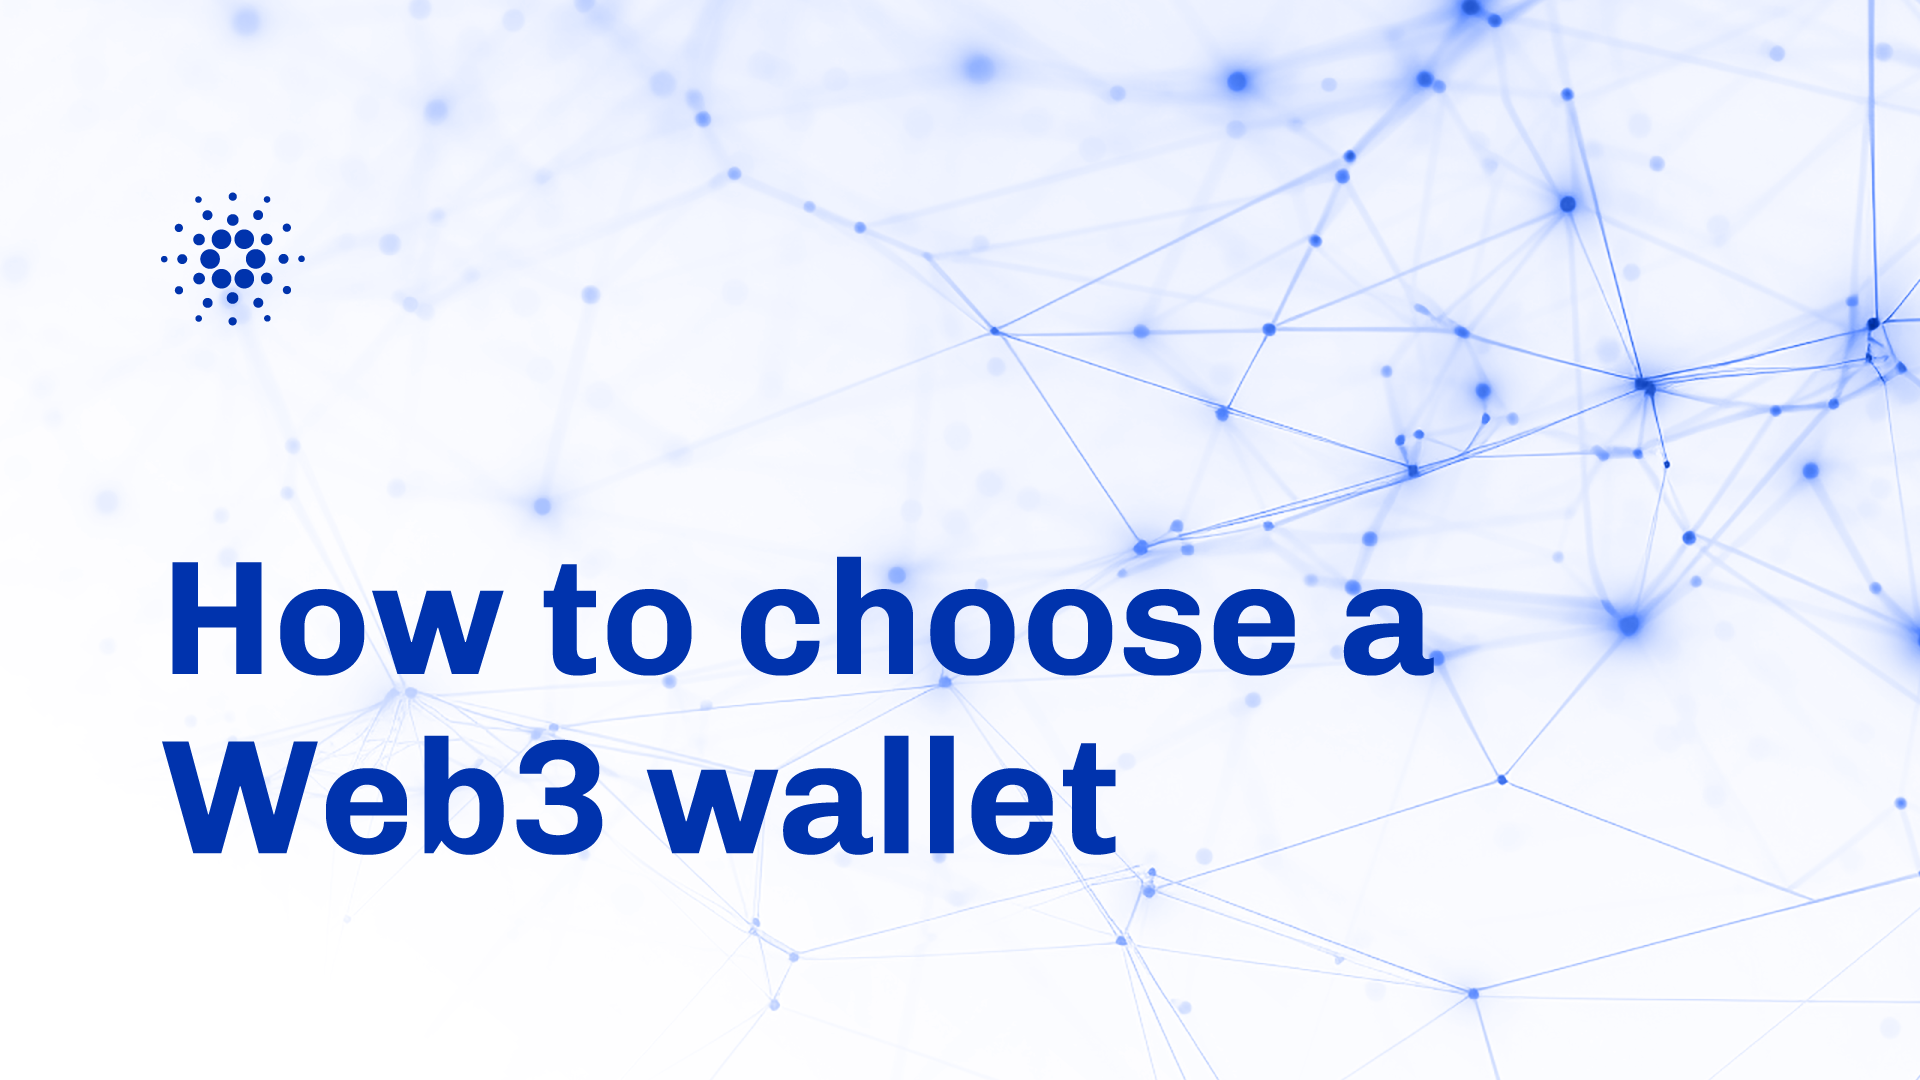 How to choose a Web3 wallet